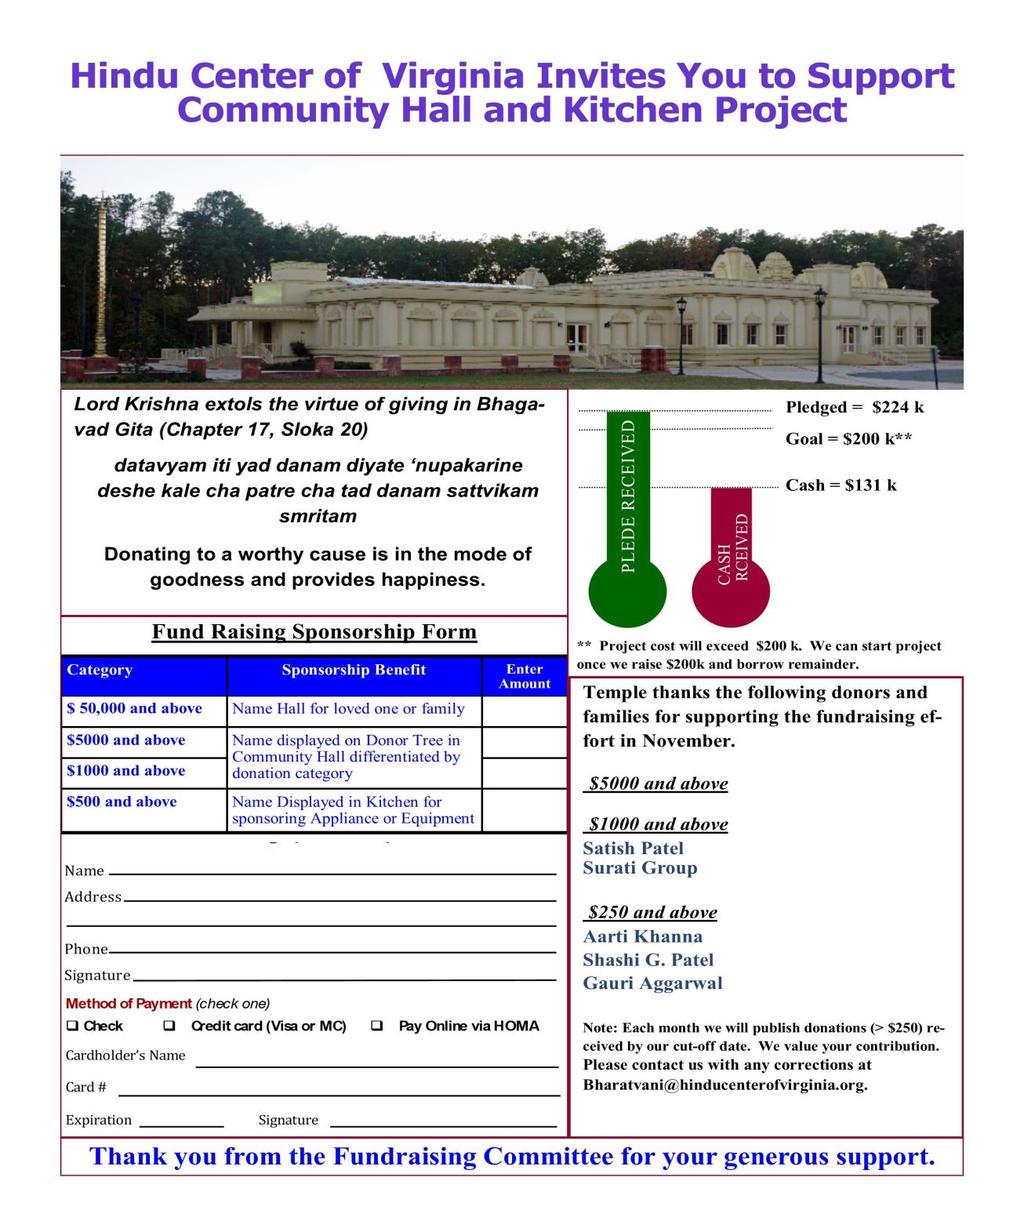 Sunday, February 17, 2019 is Bhumi Puja date for the new community hall and kitchen project.